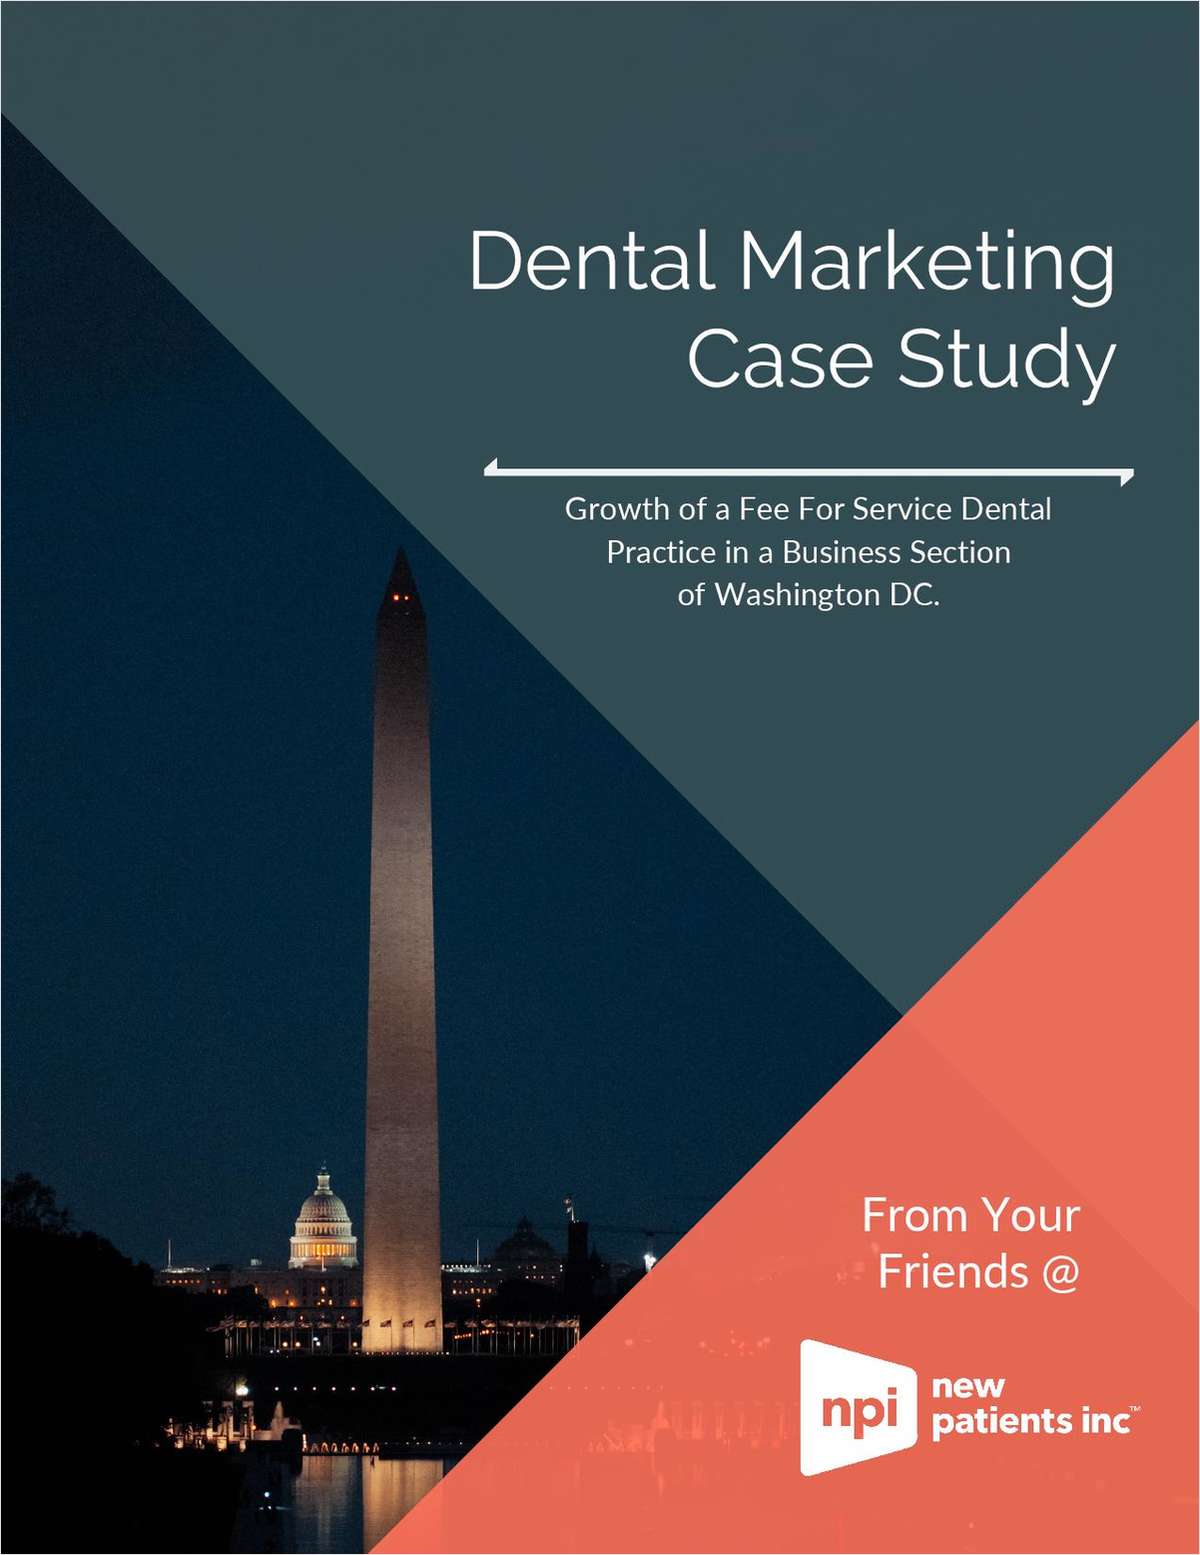 Growth of a Fee For Service Dental Practice in a Business Section of Washington DC